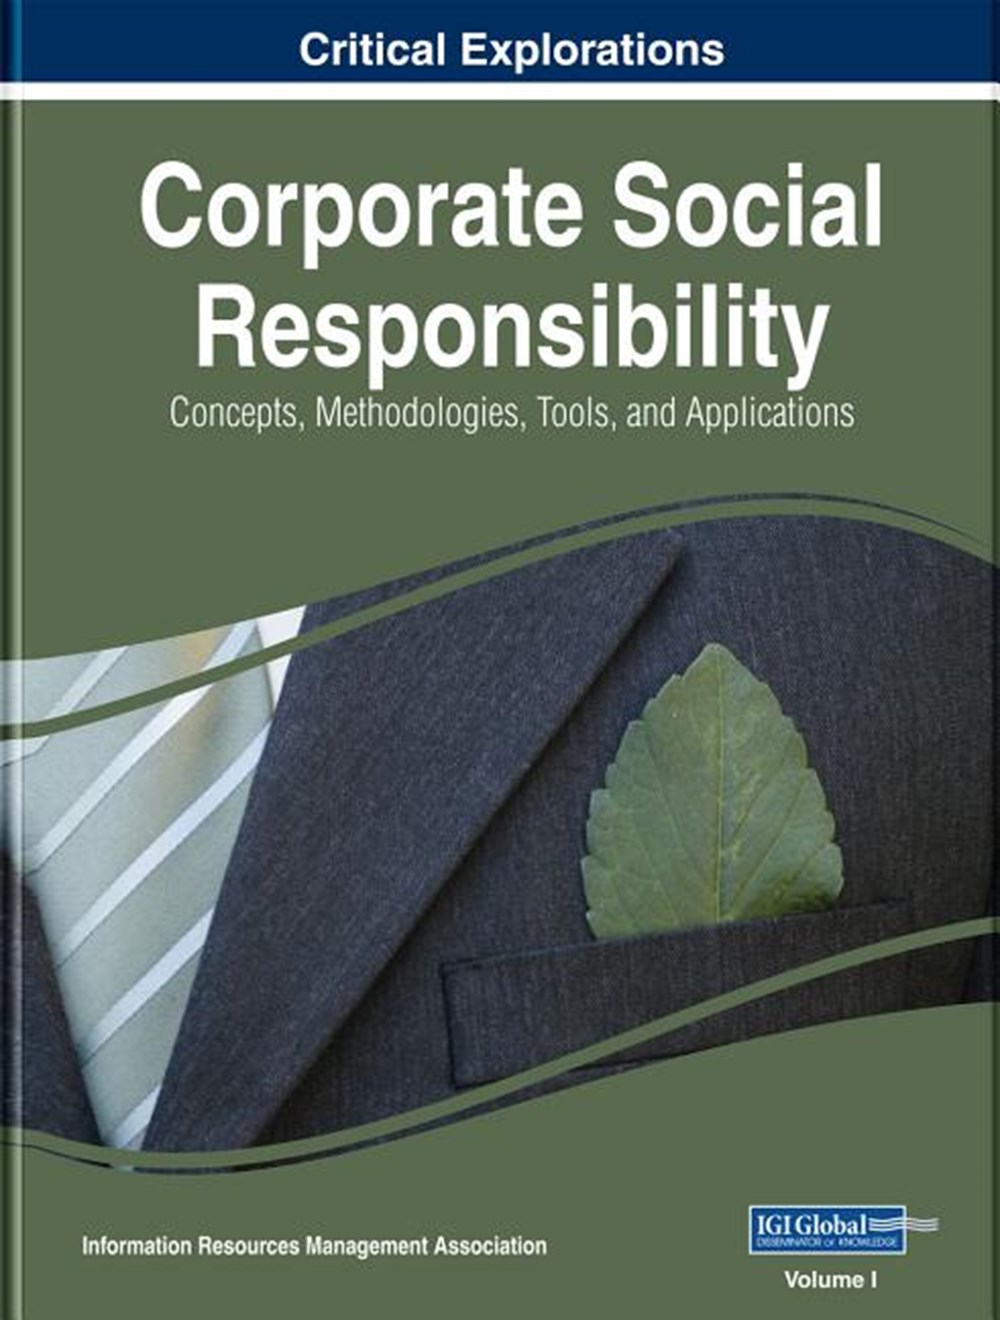 Corporate Social Responsibility: Concepts, Methodologies, Tools, and Applications, 3 volume